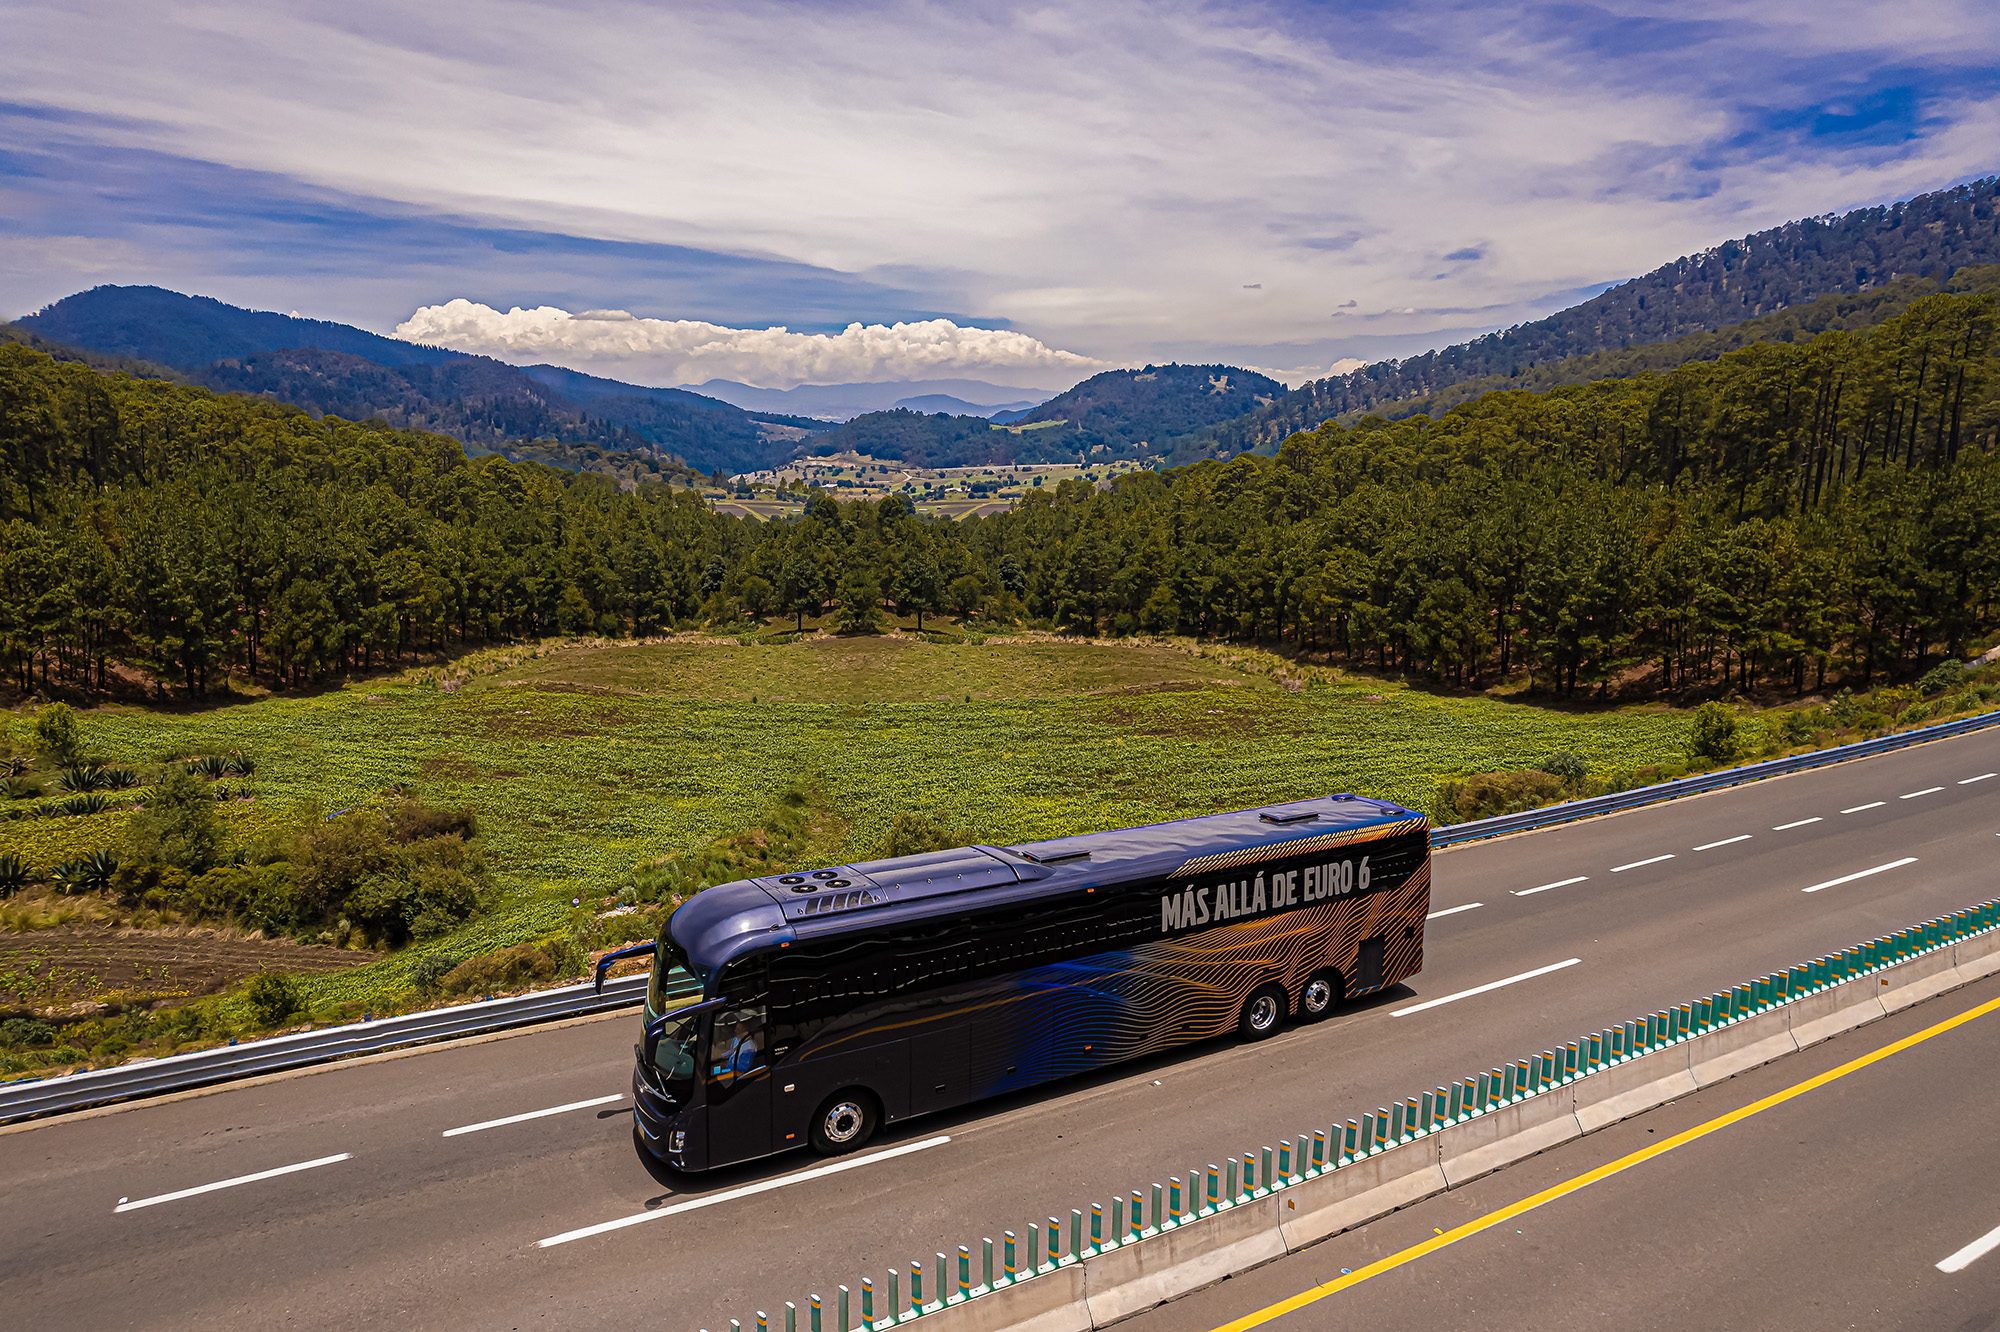 A Volvo 9800 Euro 6 coach on the road in Mexico